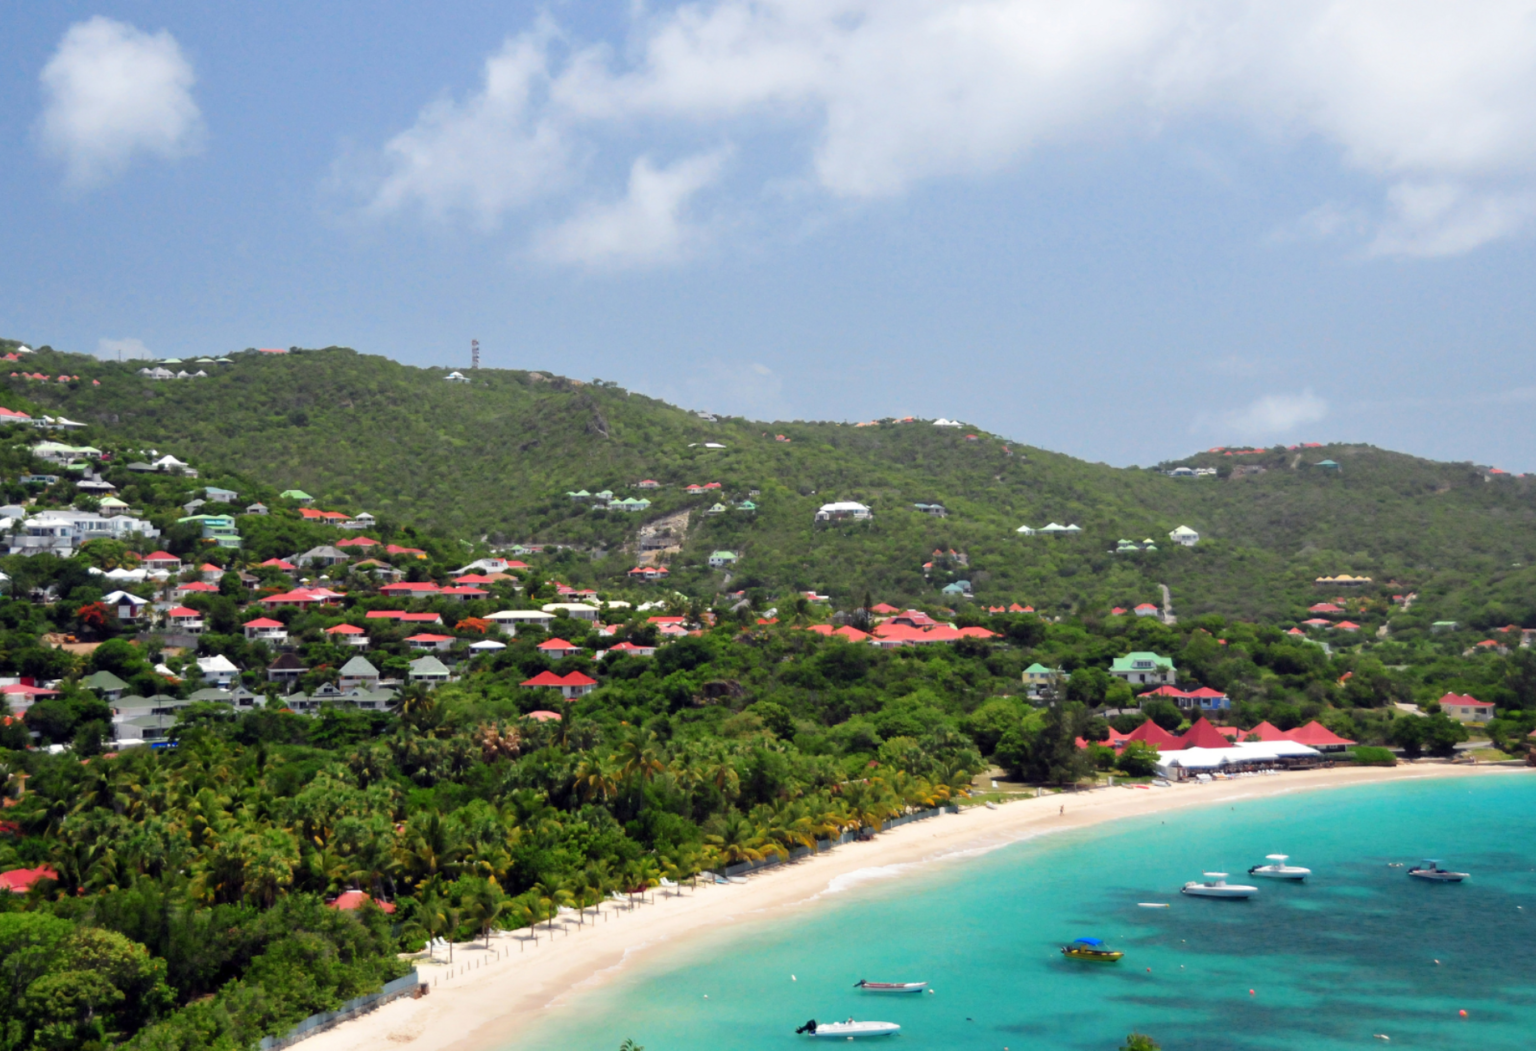 bird's eye view of St. Barts for an article on the best hotels in St. Barts